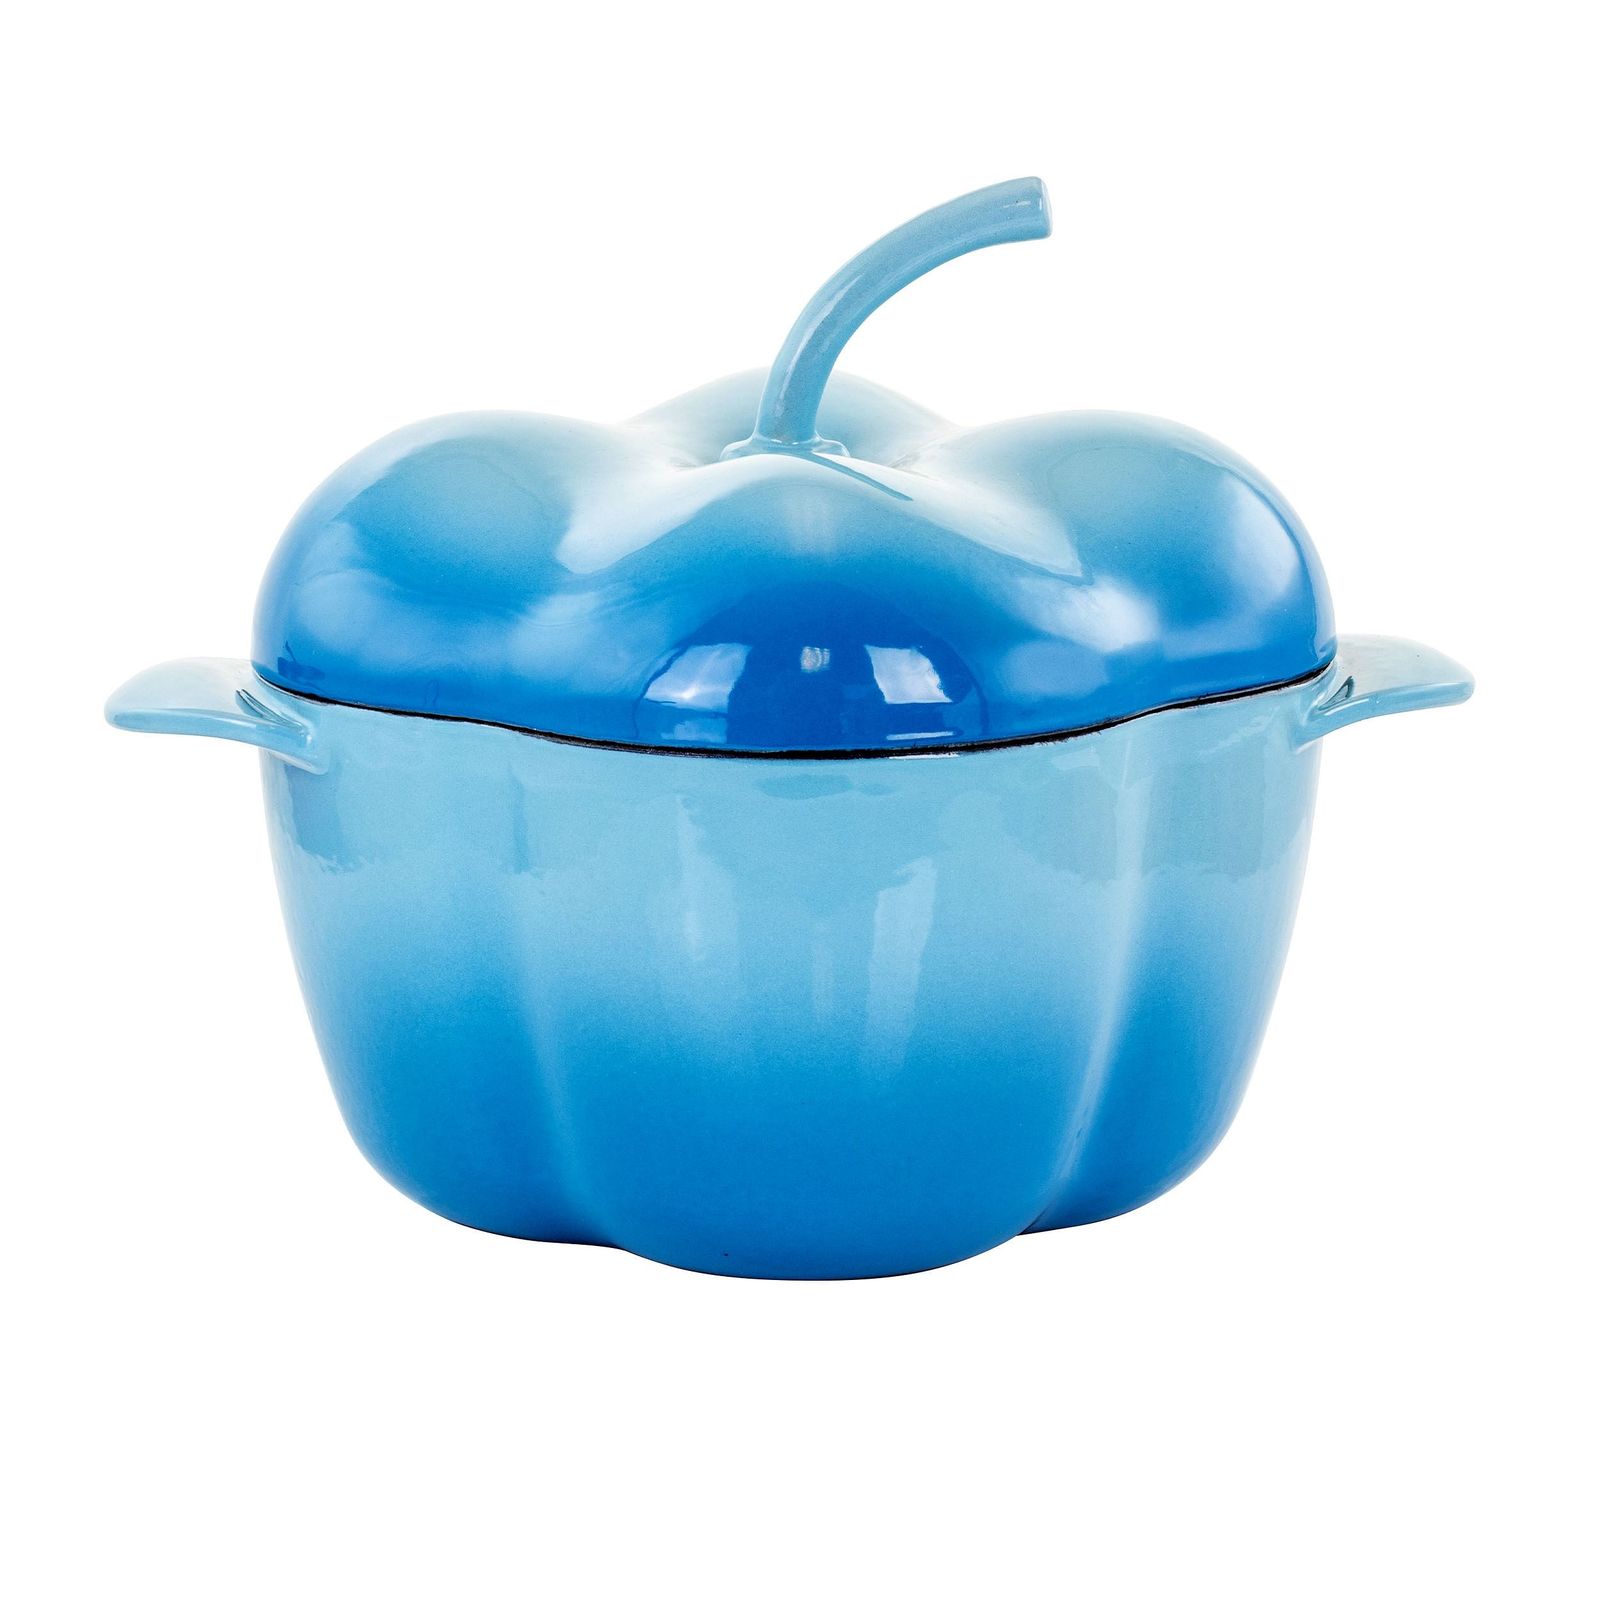 Primary image for MegaChef Pepper Shaped 3 Quart Enameled Cast Iron Casserole in Blue